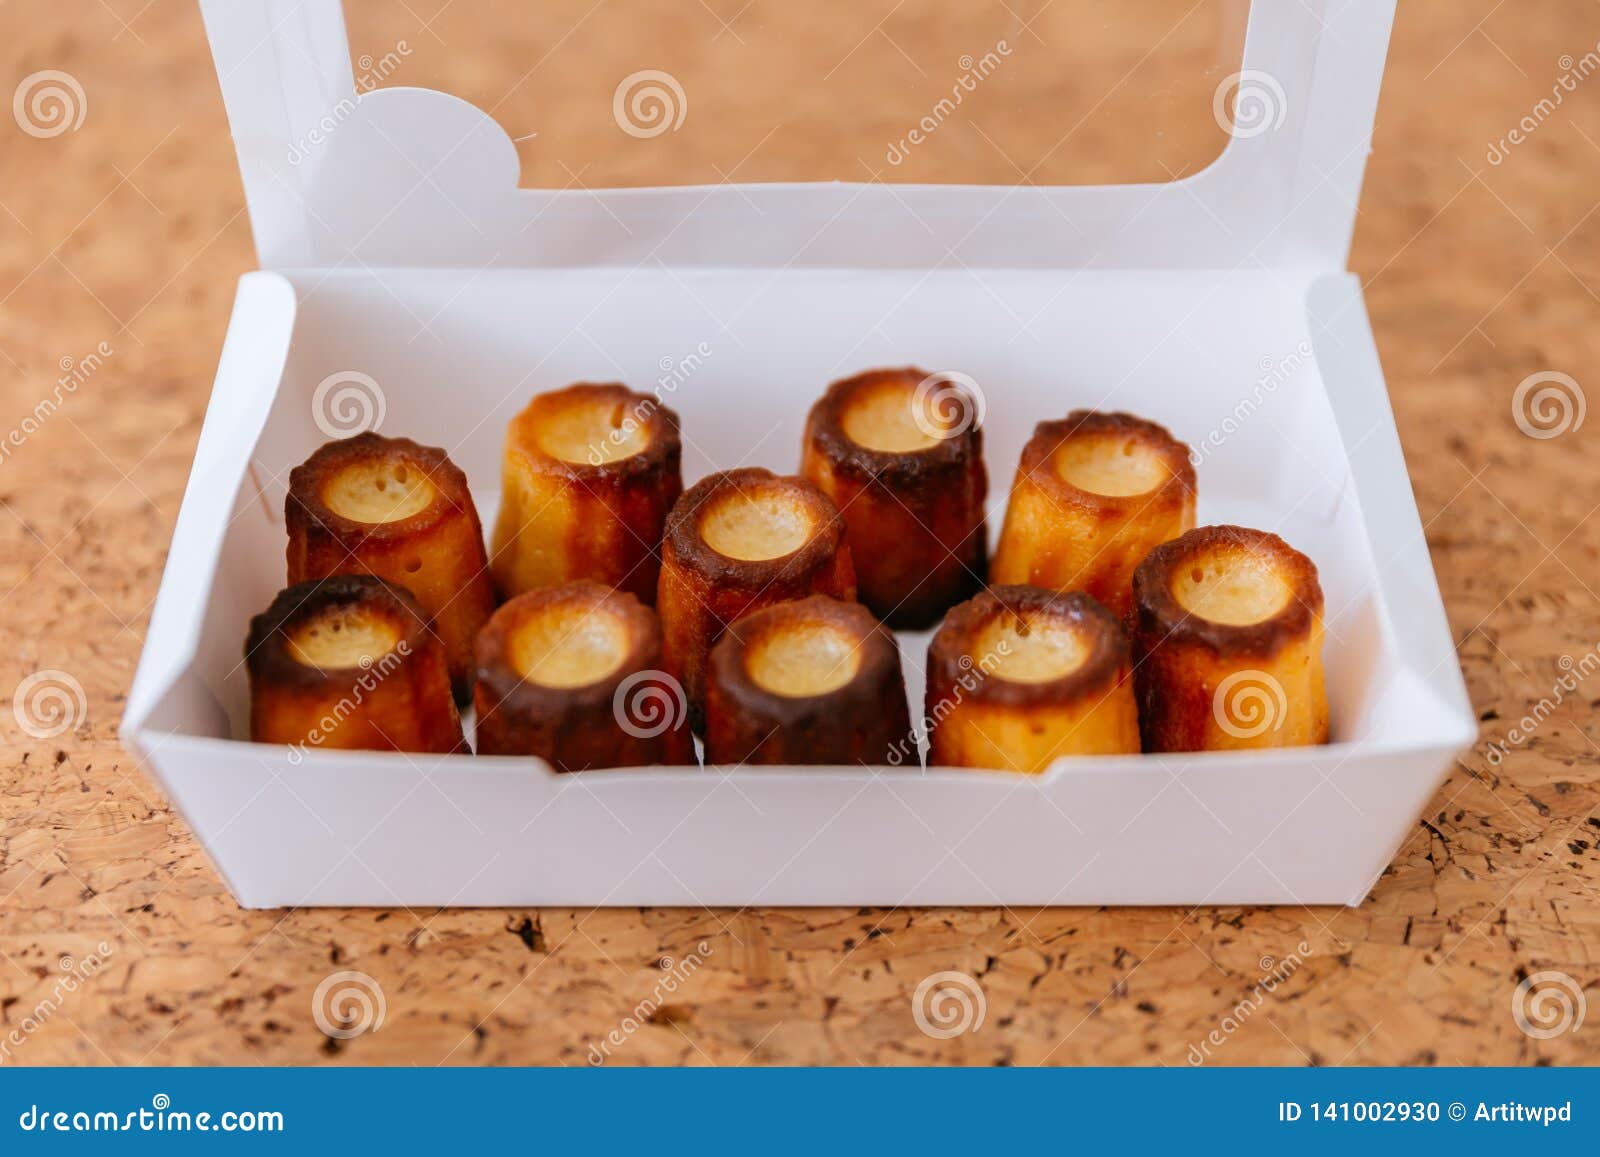 top view of fresh baked canelÃÂ©s inside white paper box. a small french pastry flavored with rum and vanilla.